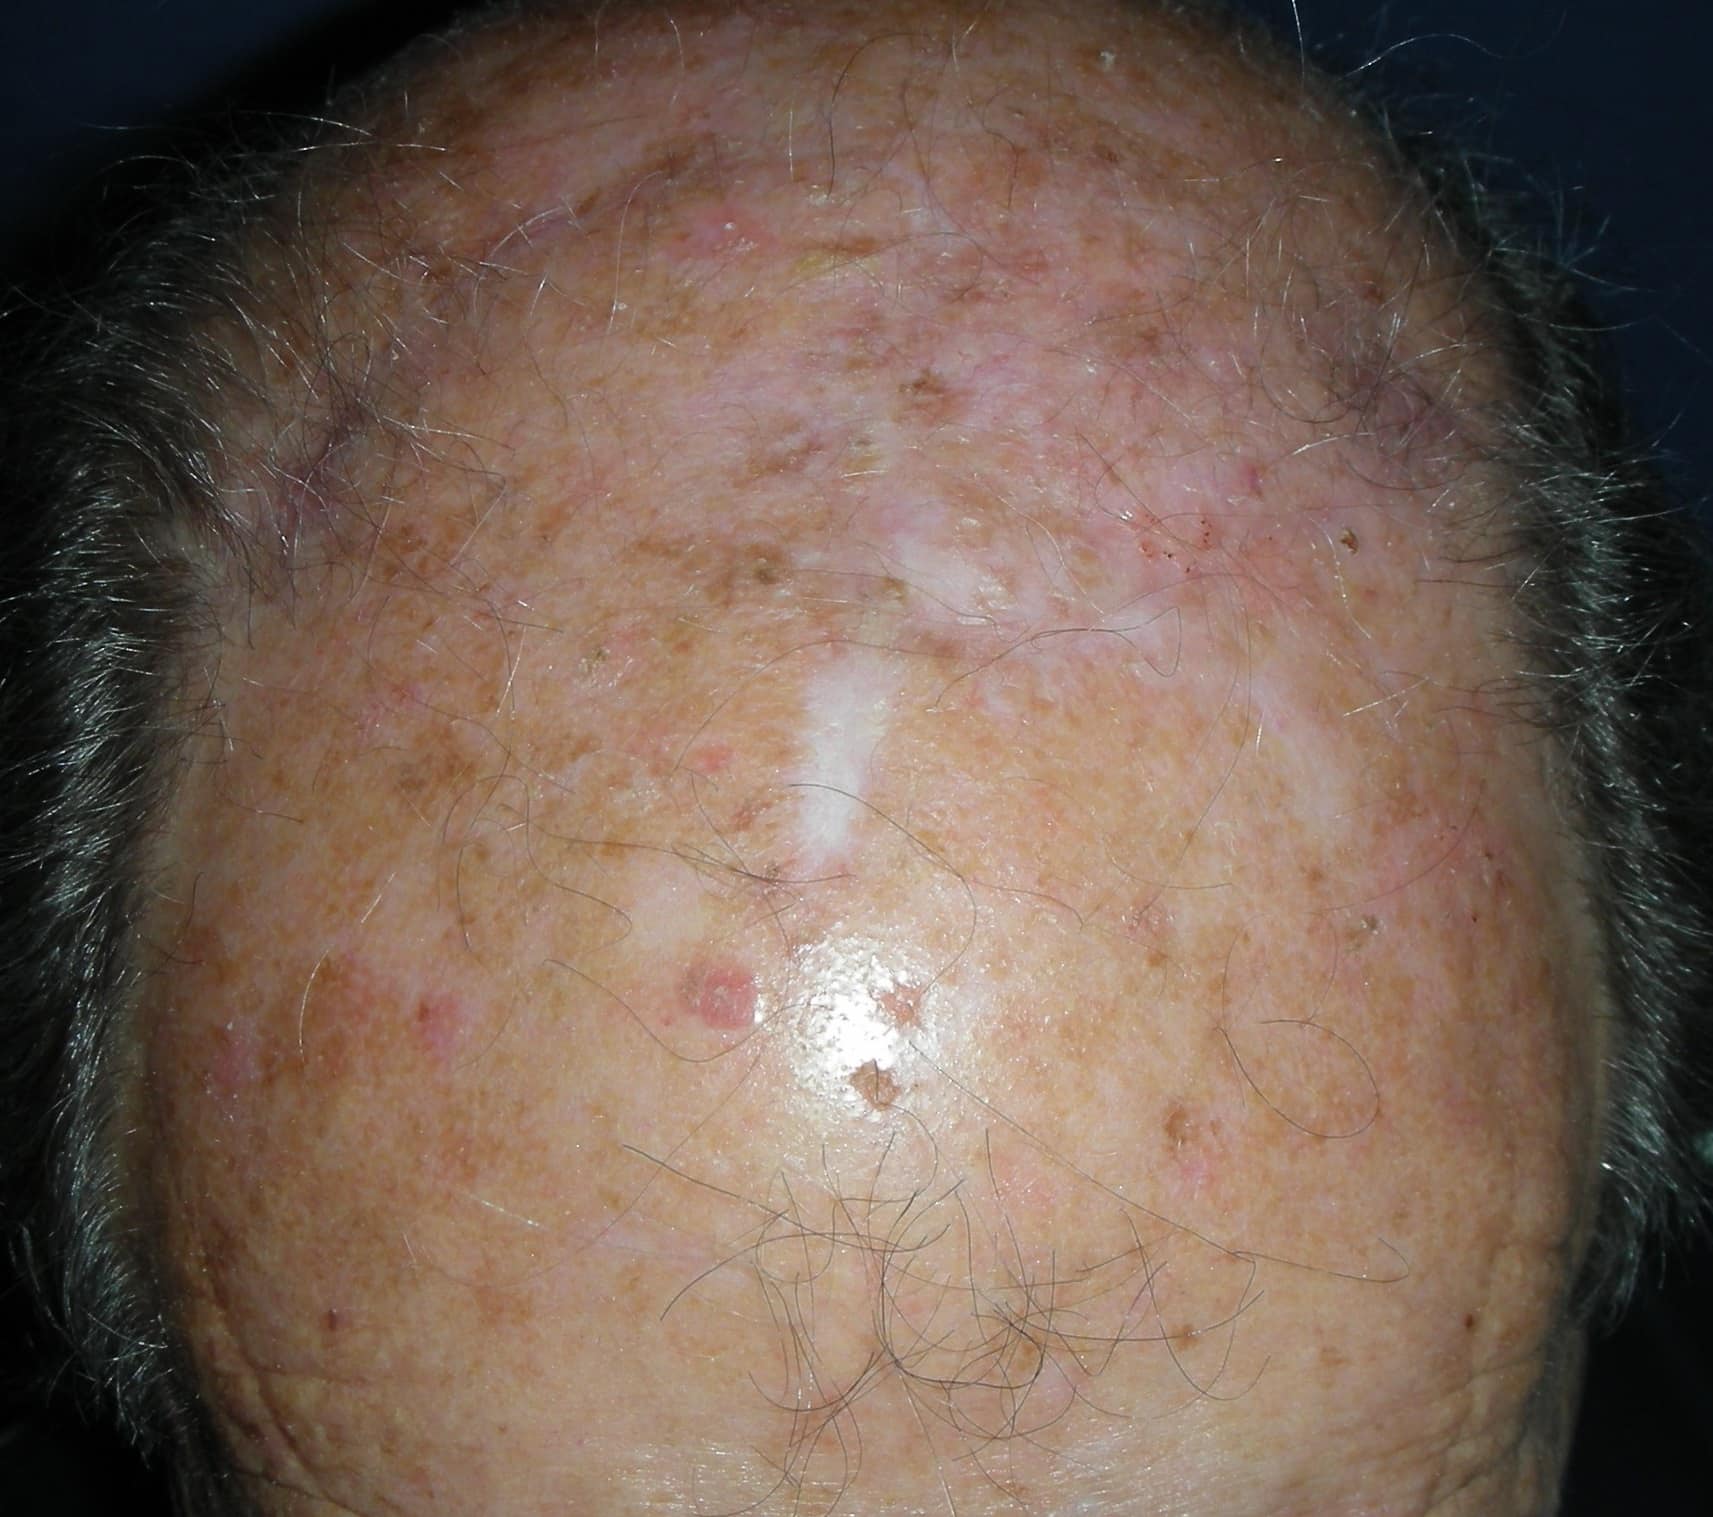 Skin Cancer On Top Of Head